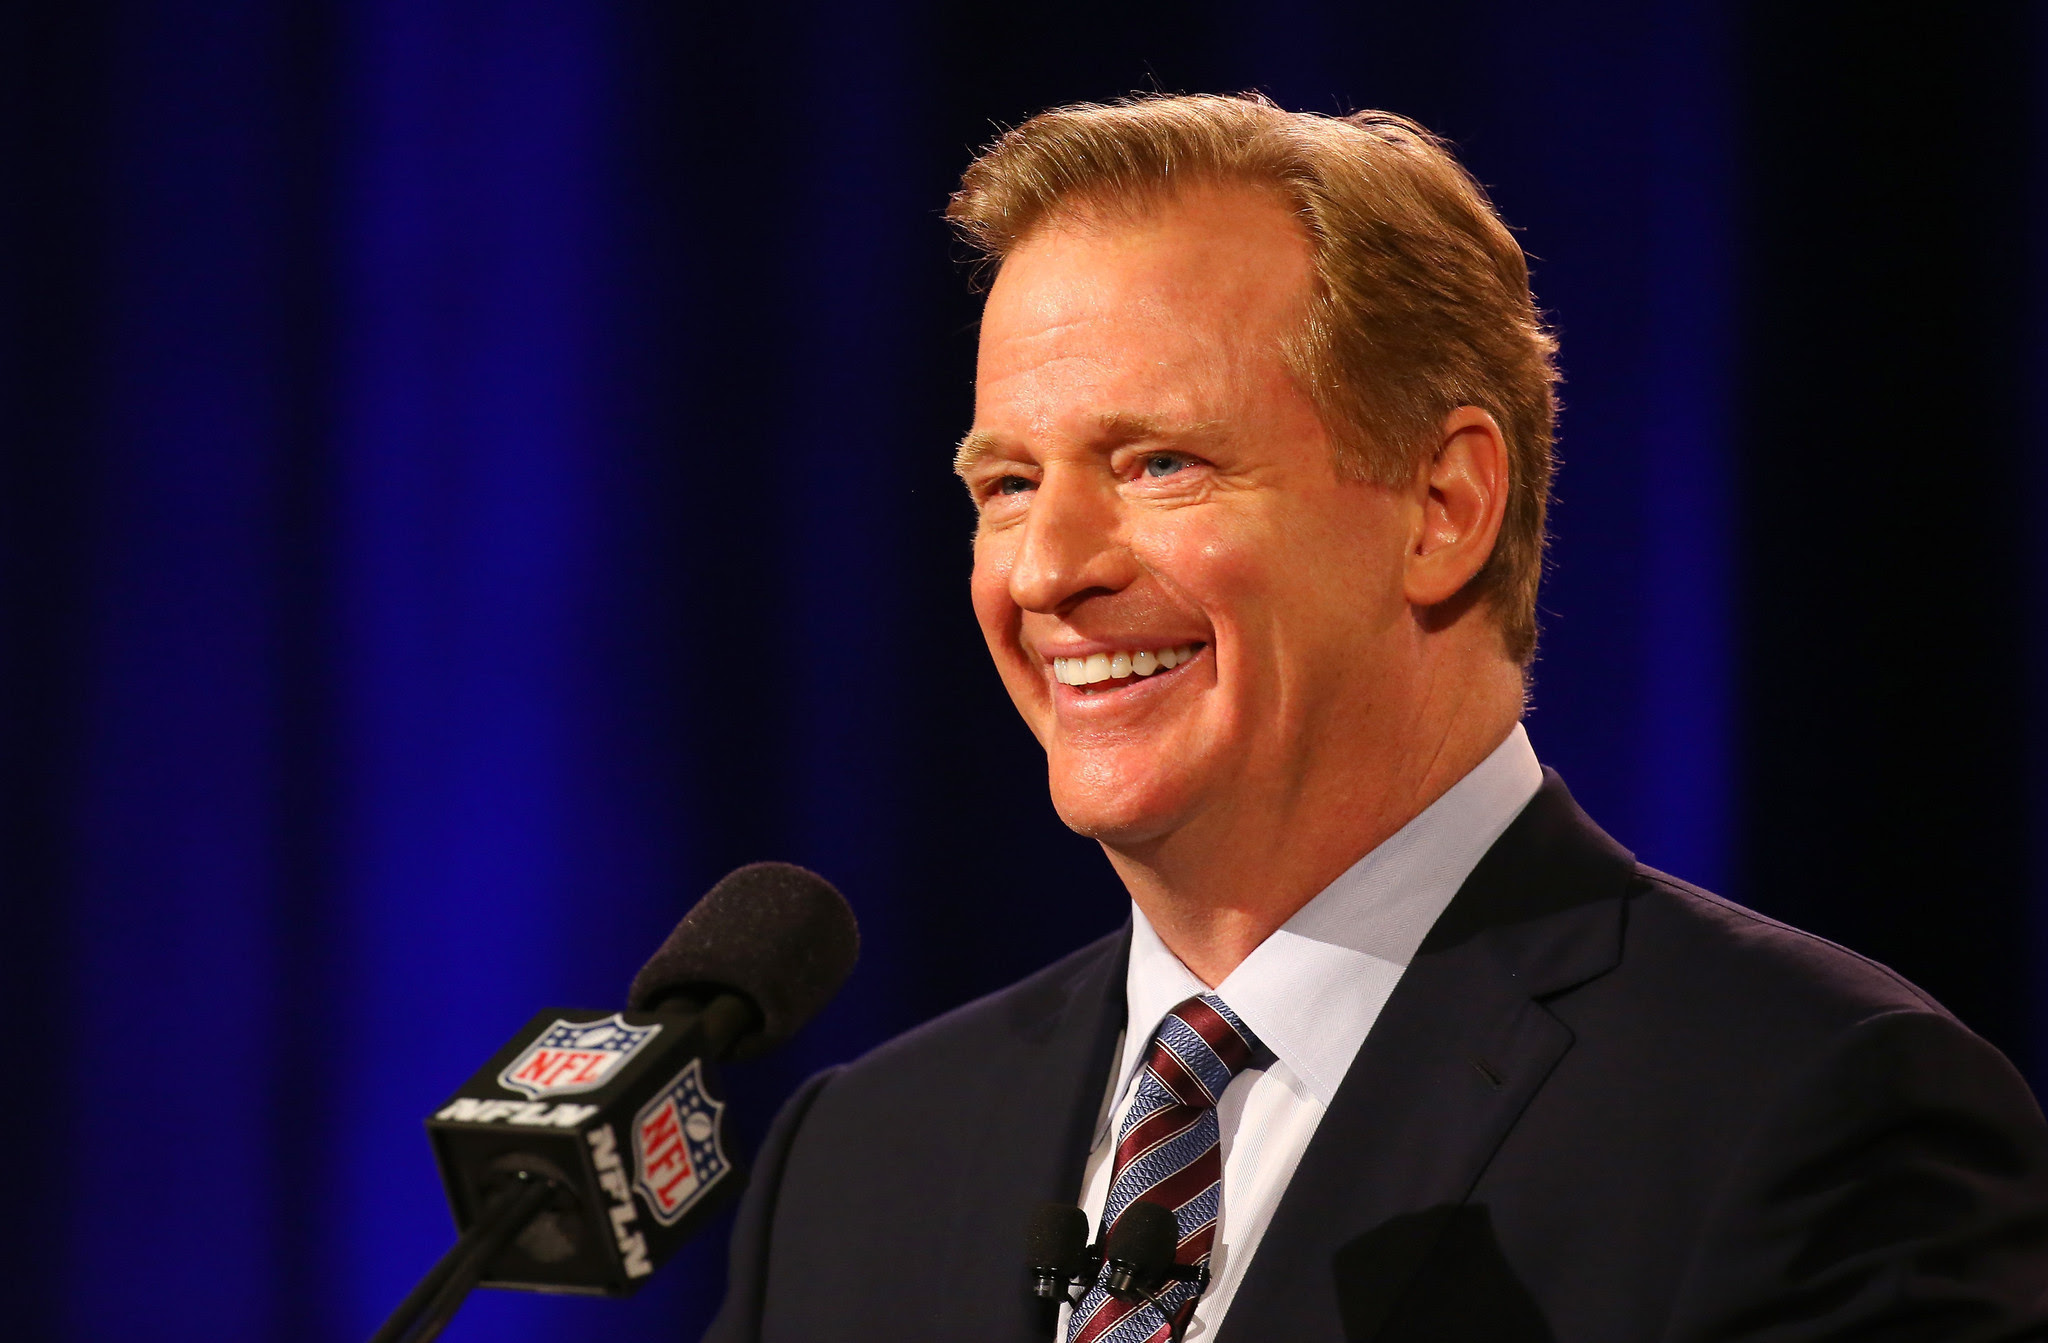 NFL's Roger Goodell has his swagger back with an answer for everything